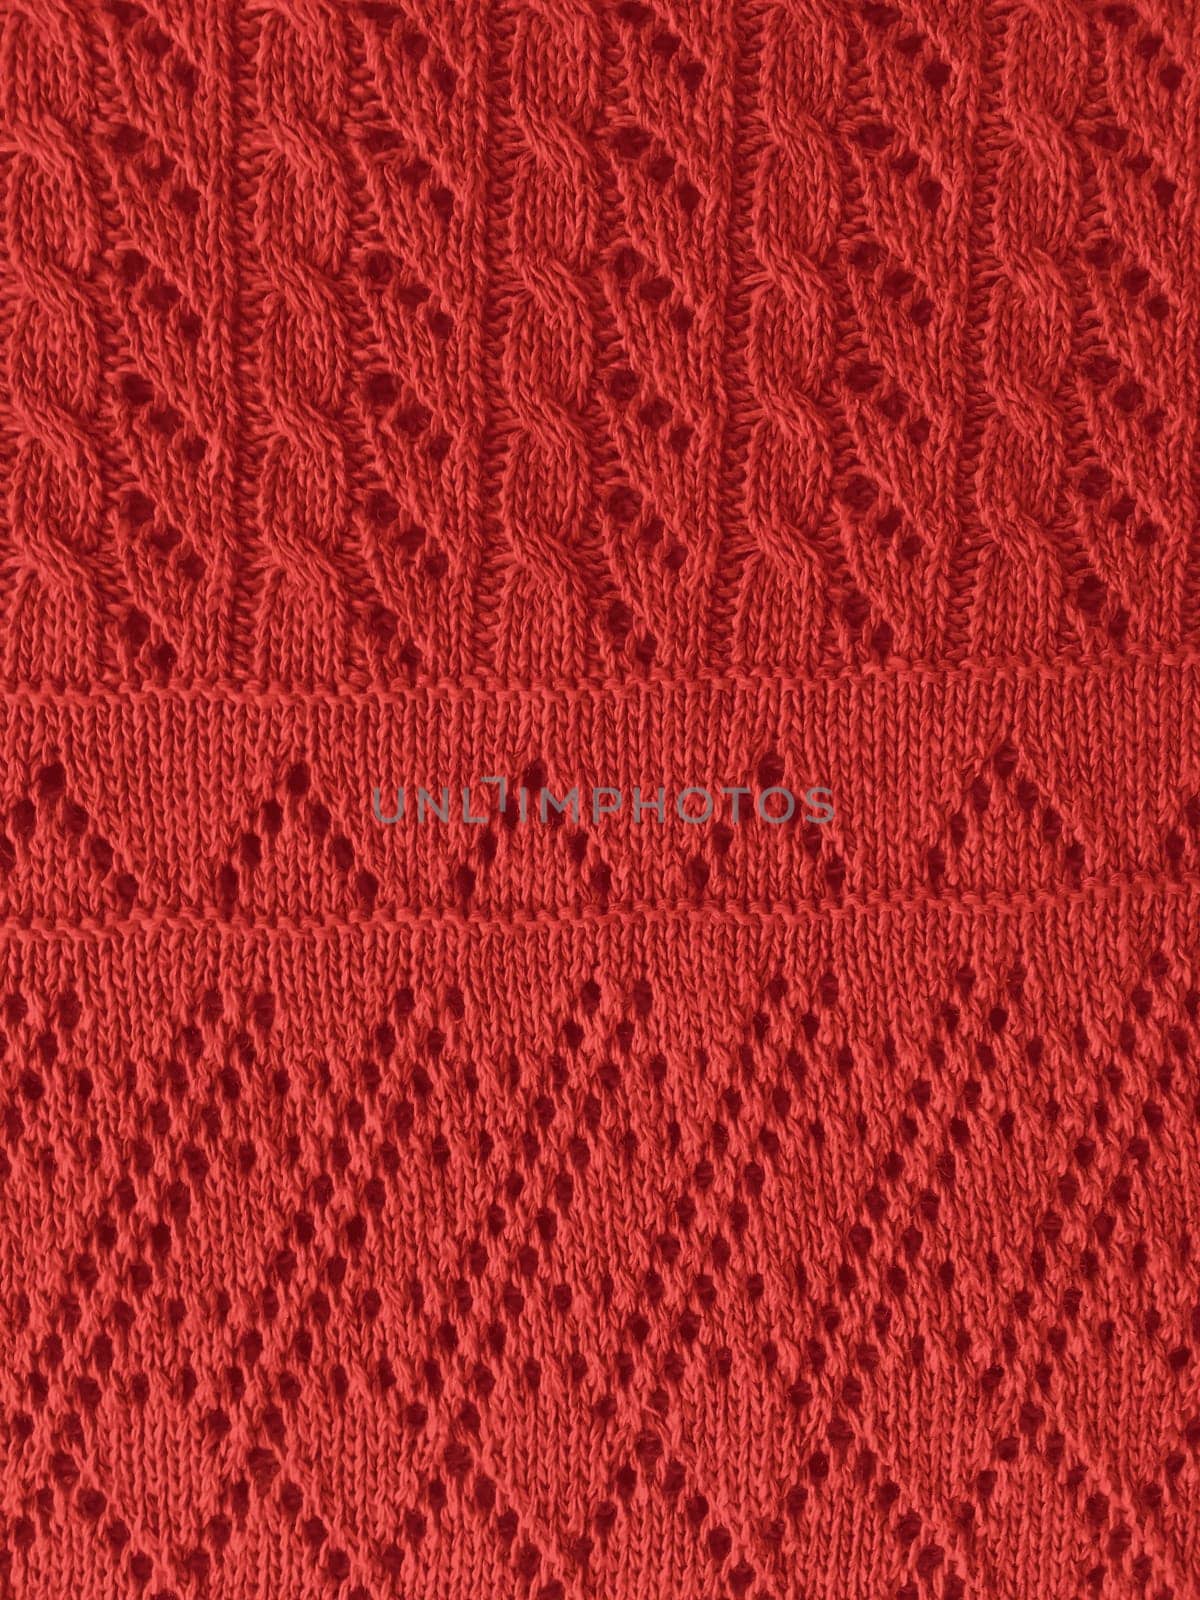 Organic knitting background with detail woven threads. by YASNARADA